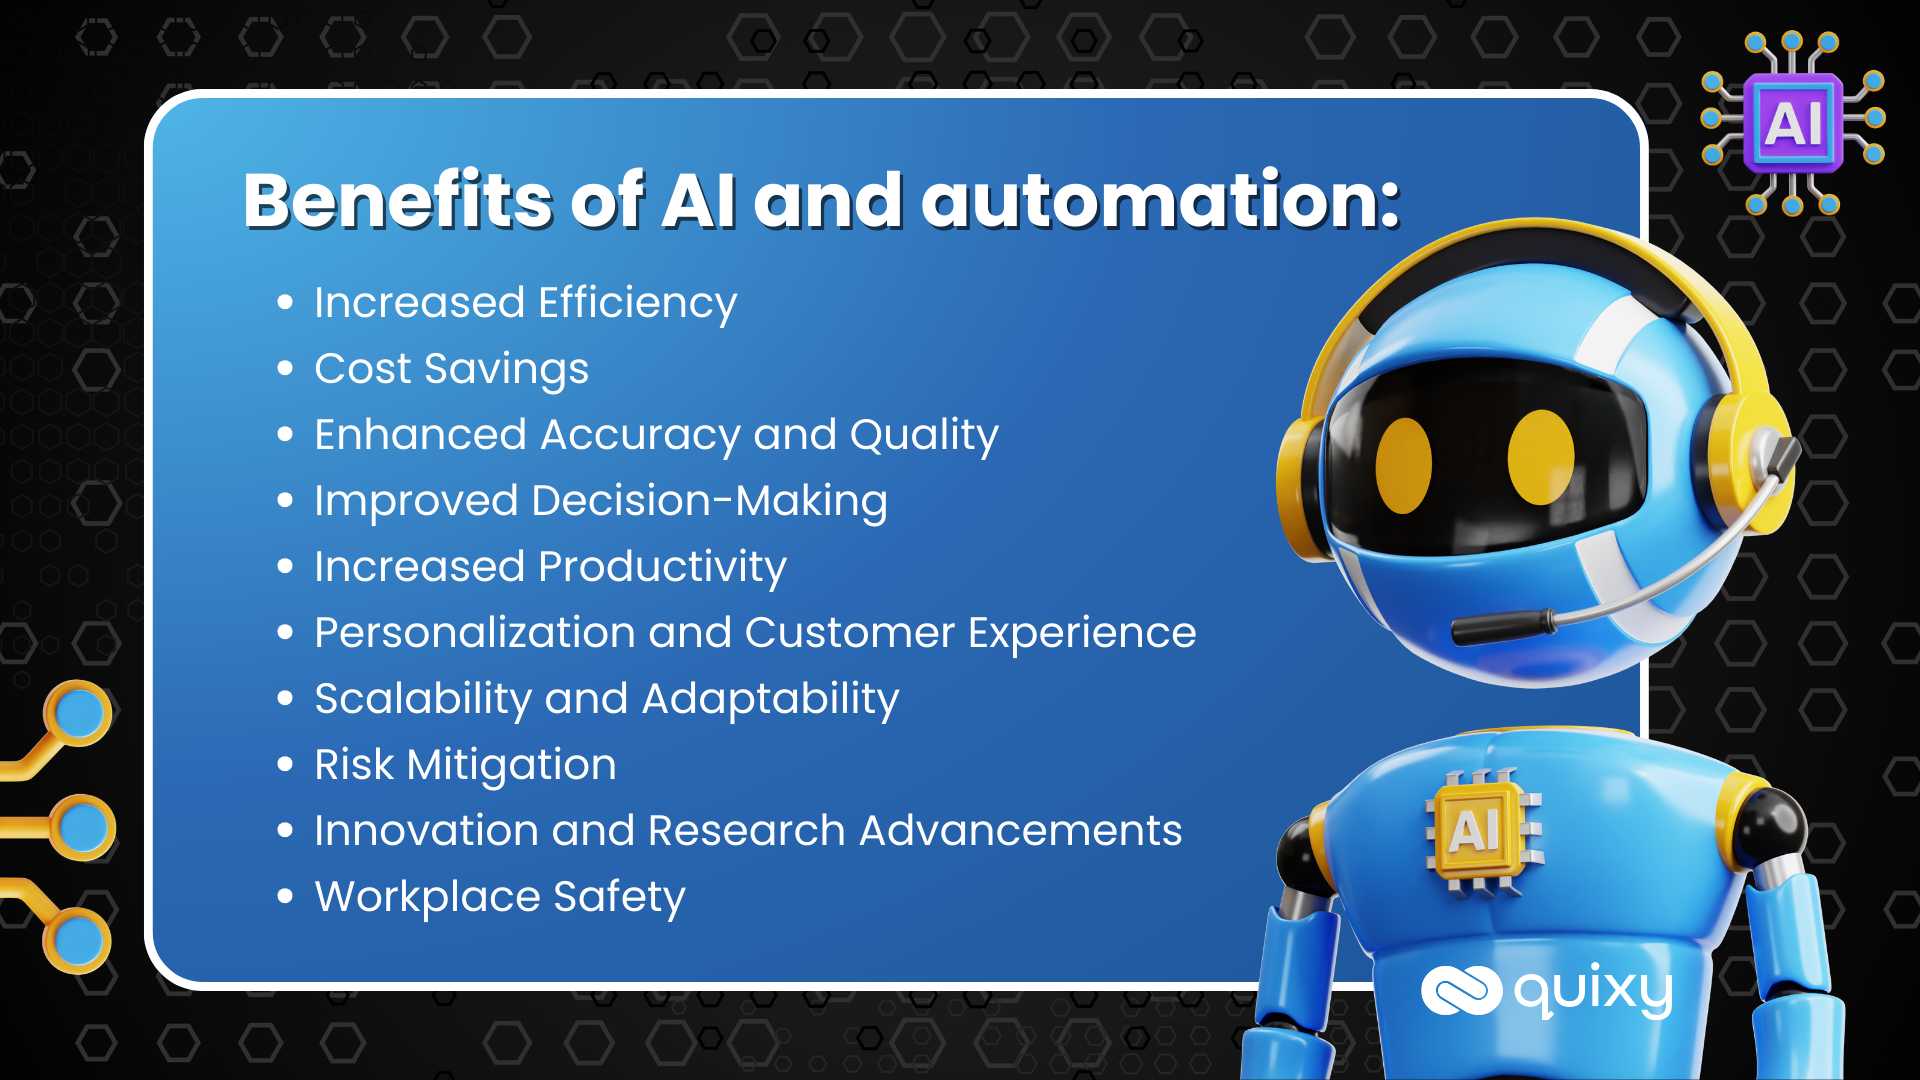 Benefits of AI and automation